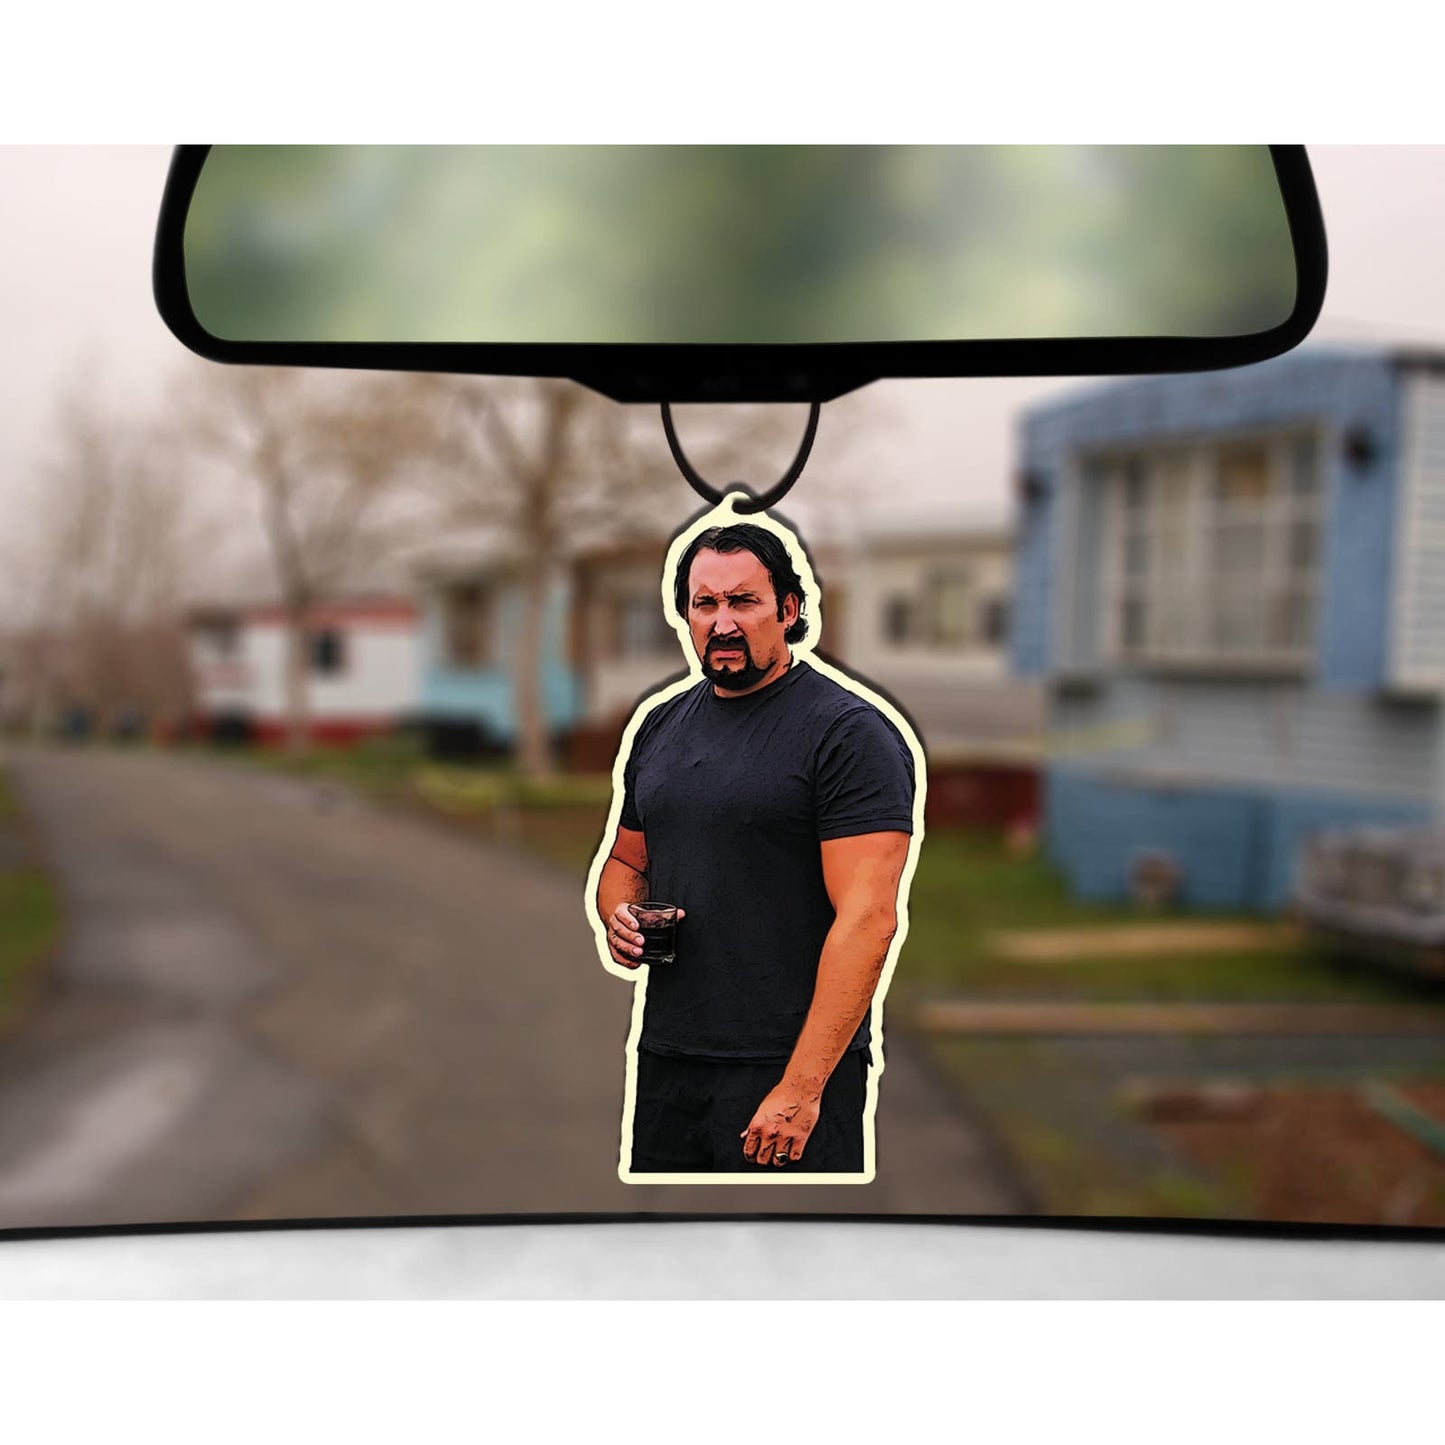 Trailer Park Boys Funny Car Air Freshener | Officially Licensed Bubbles Nice Kitty Hanging Car Air Freshener